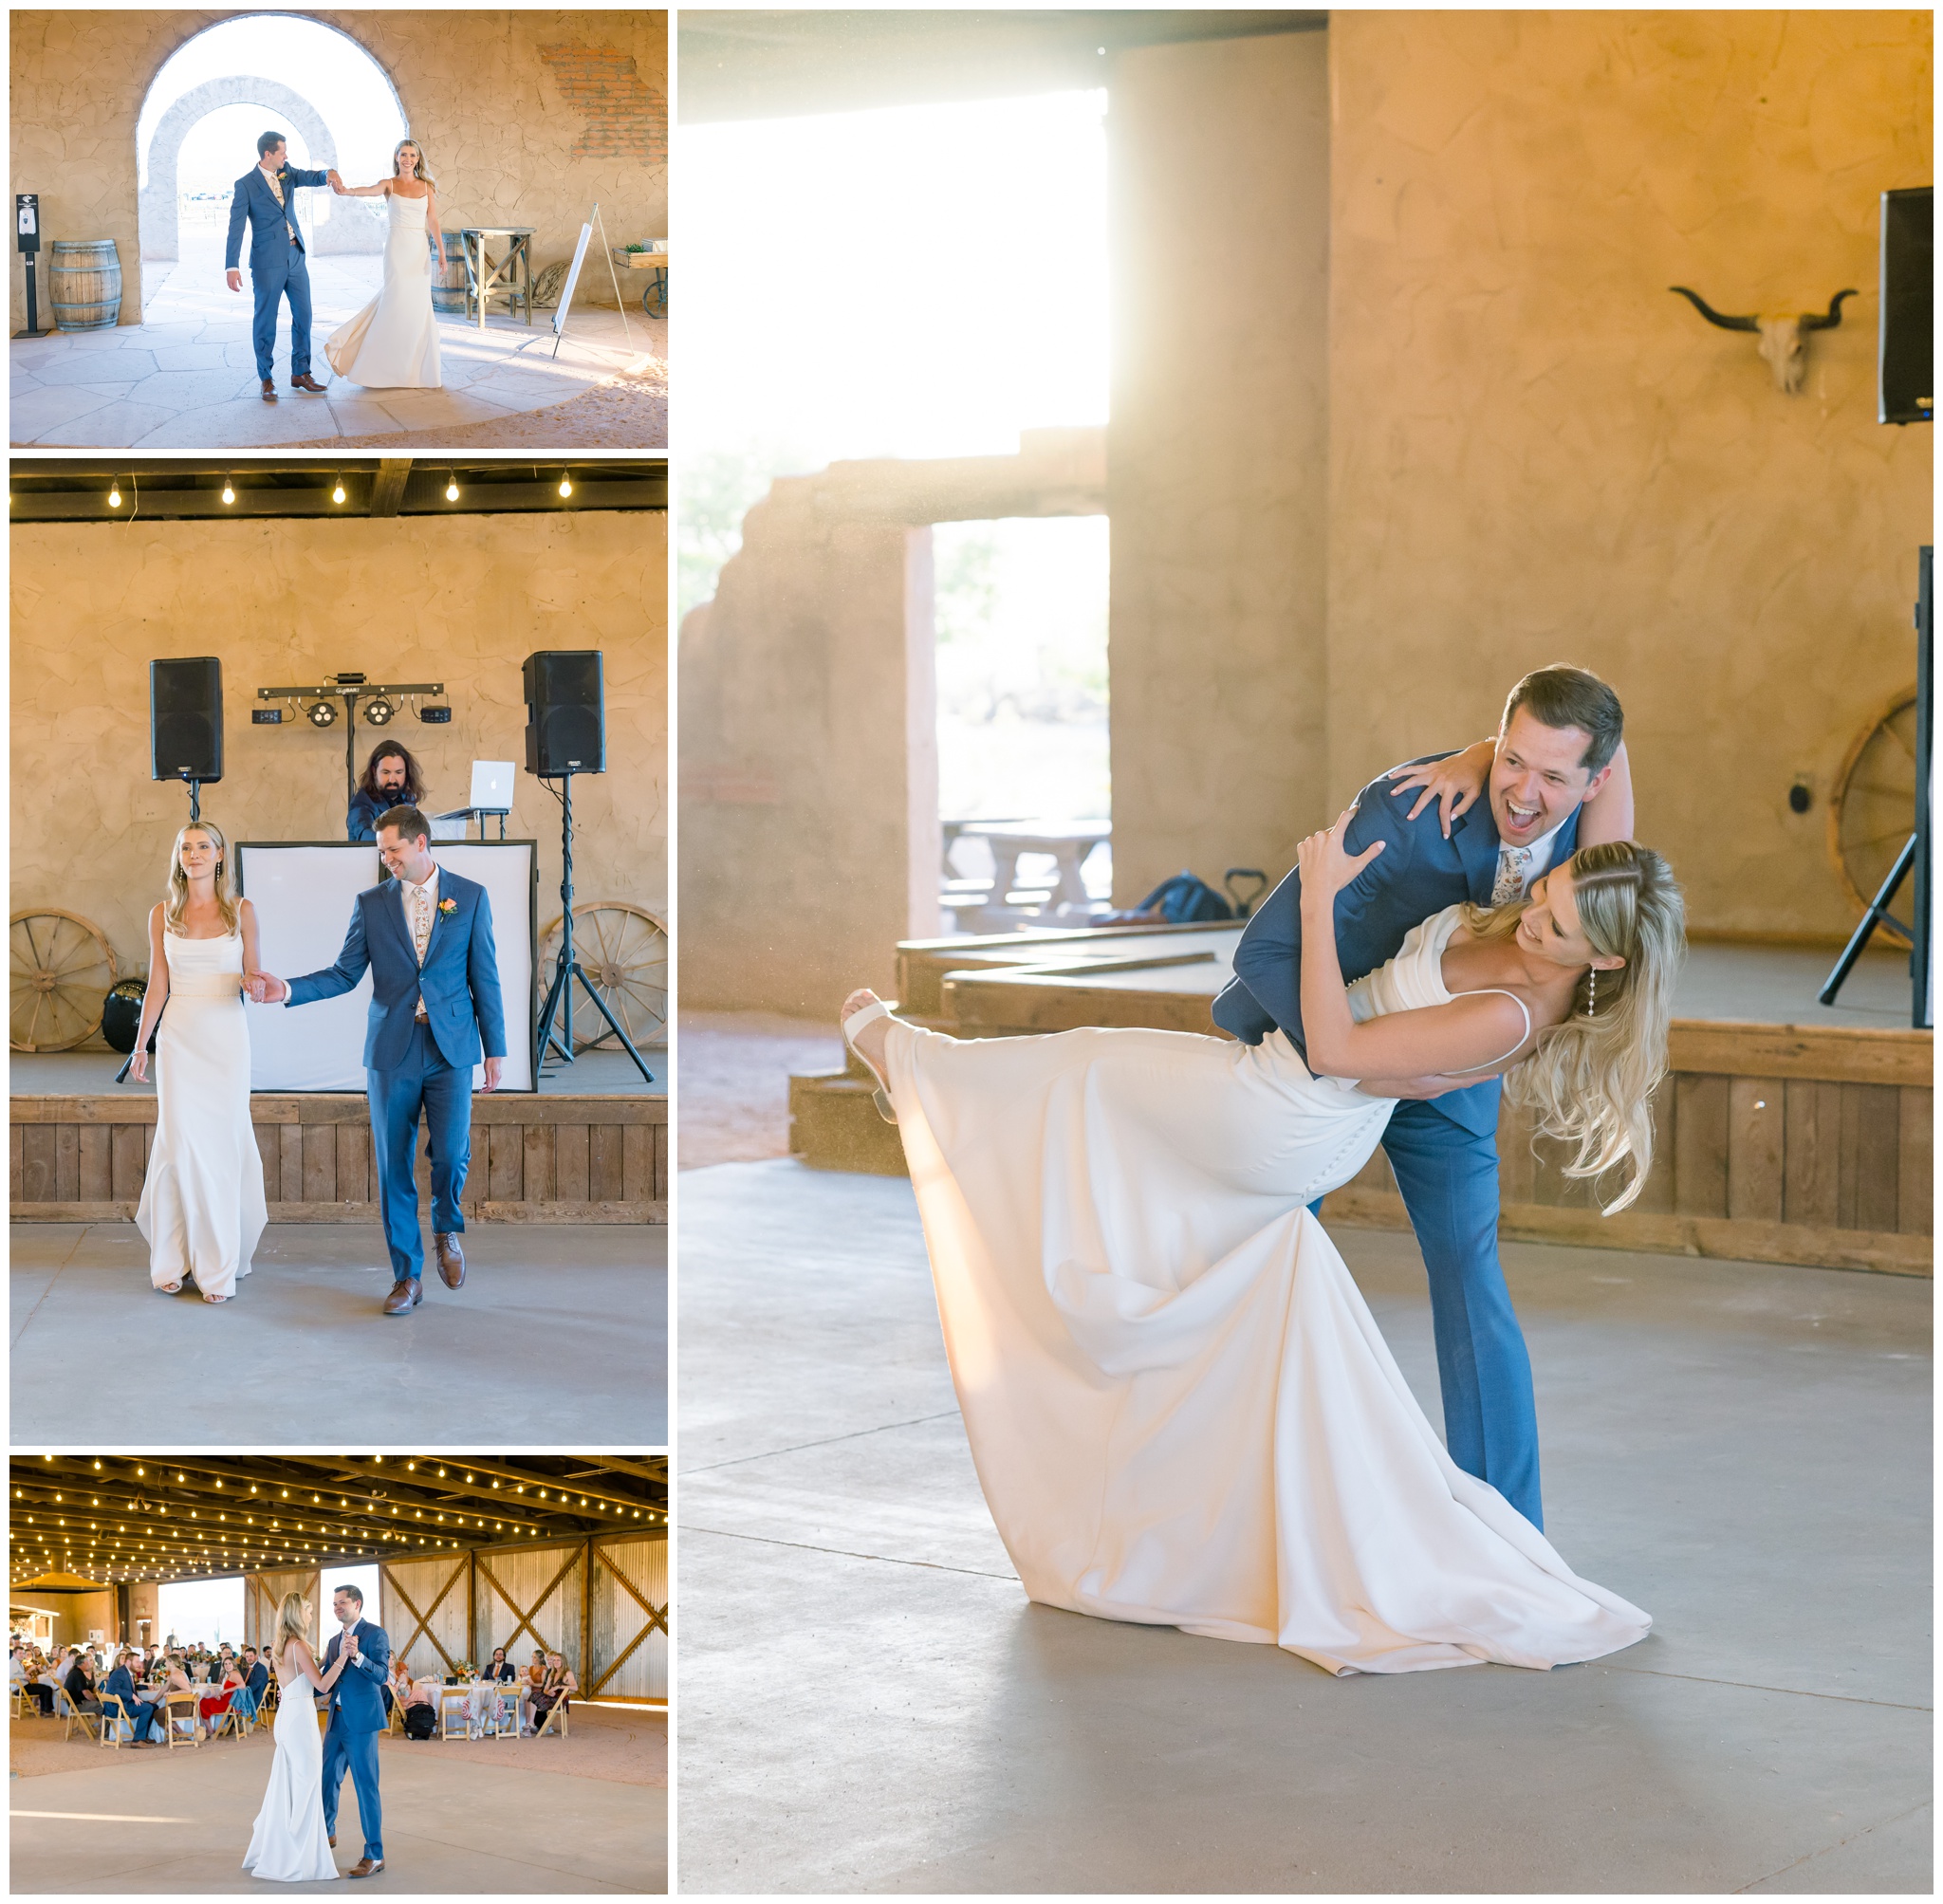 Grand entrance and first dance as husband and wife